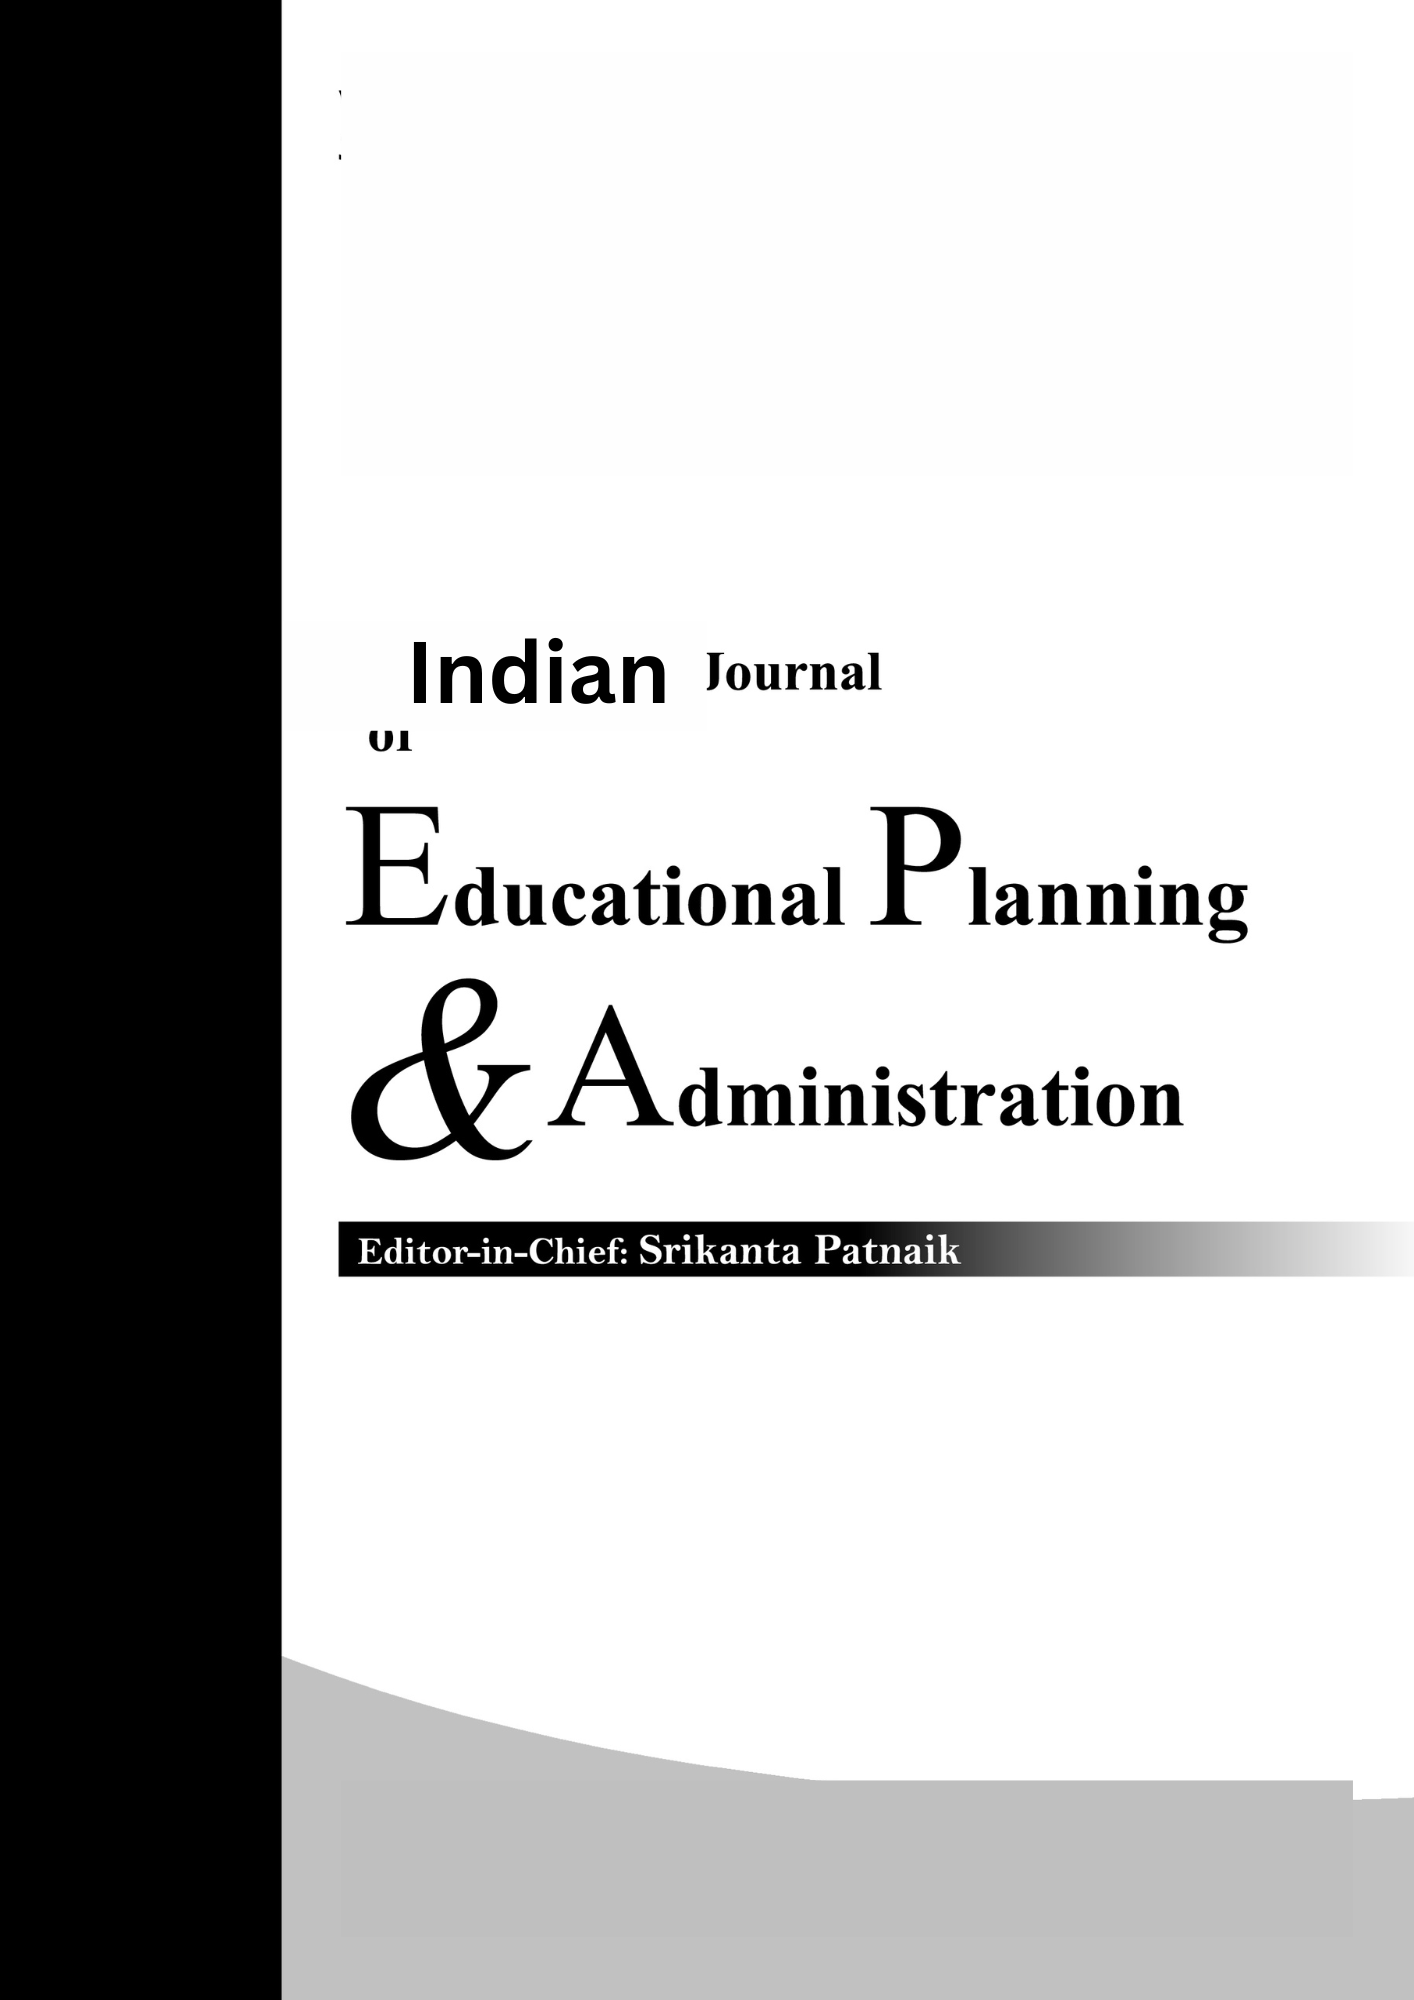 Indian Journal of Educational Planning & Administration